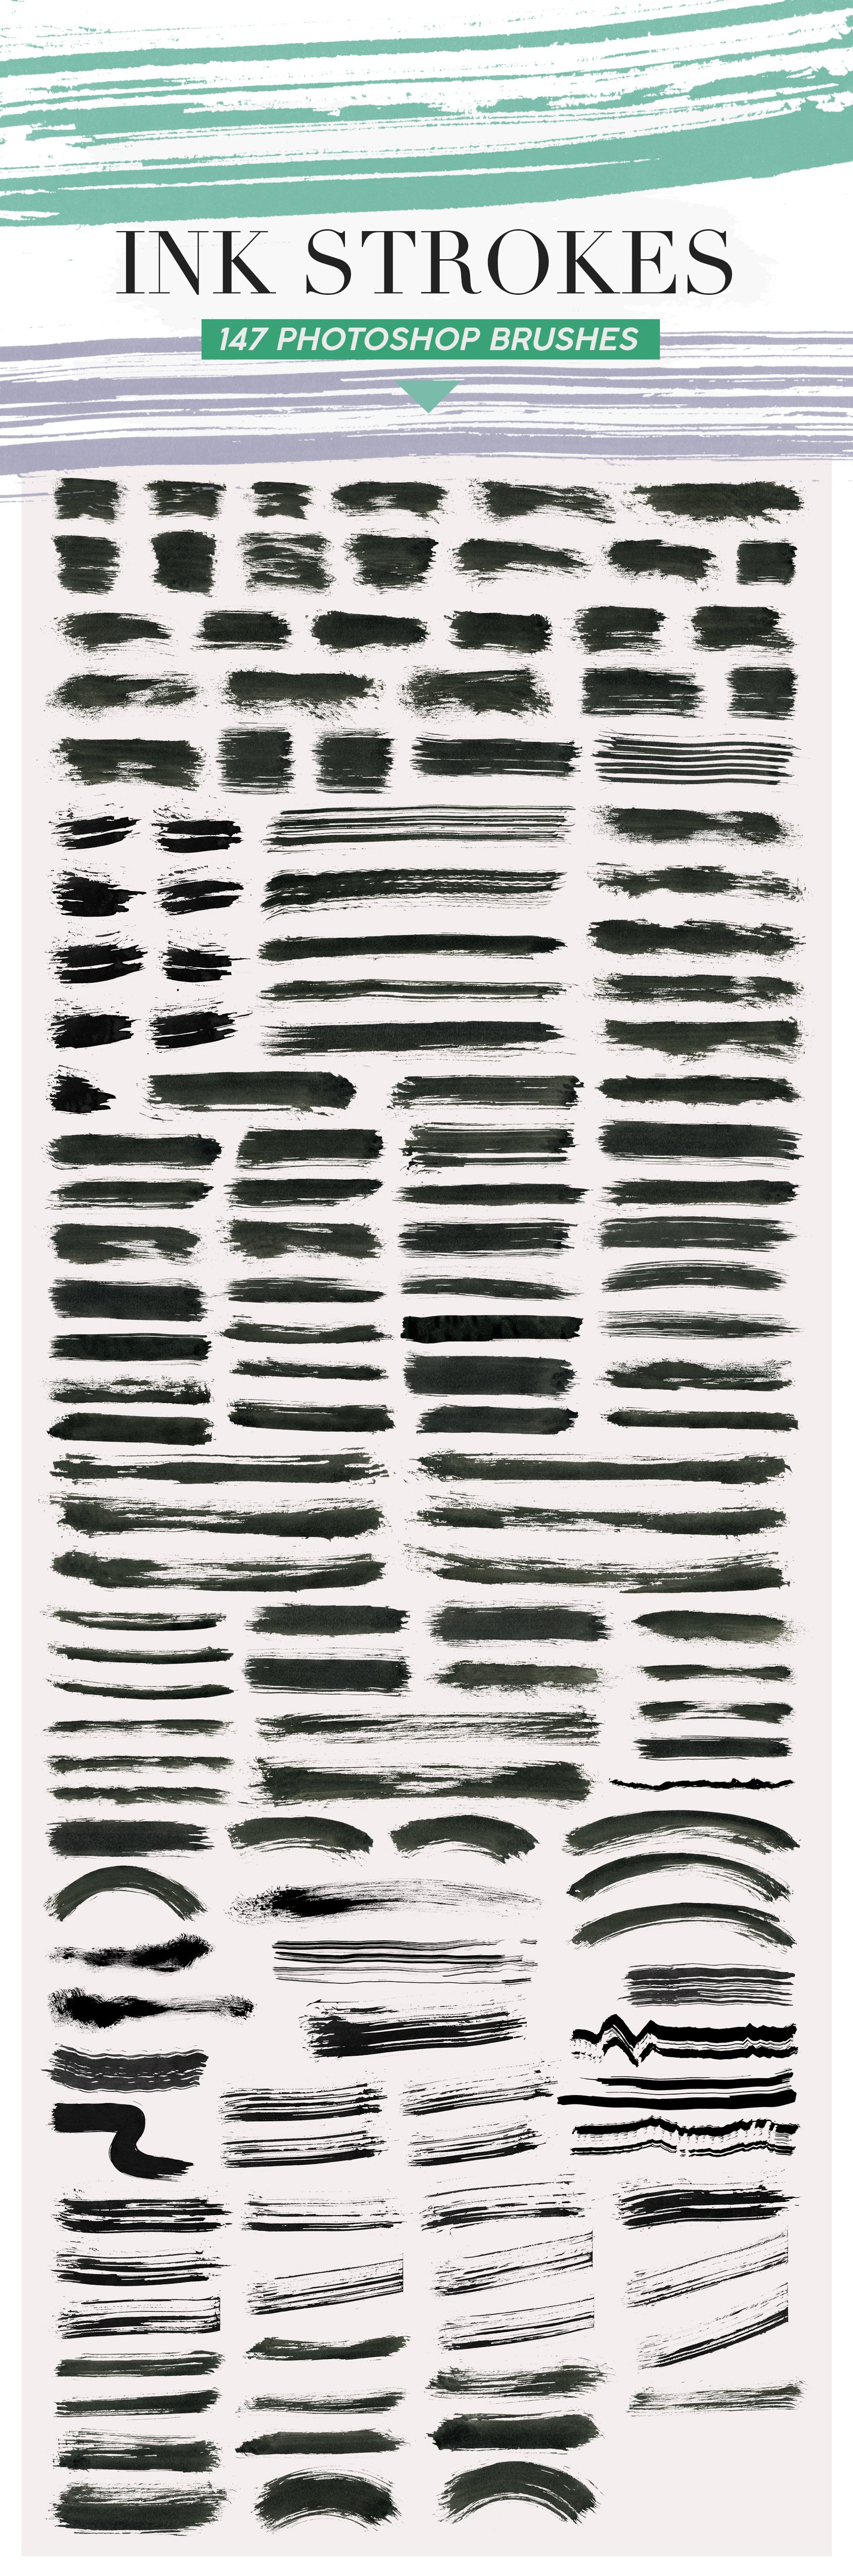 ink strokes brushes preview 352